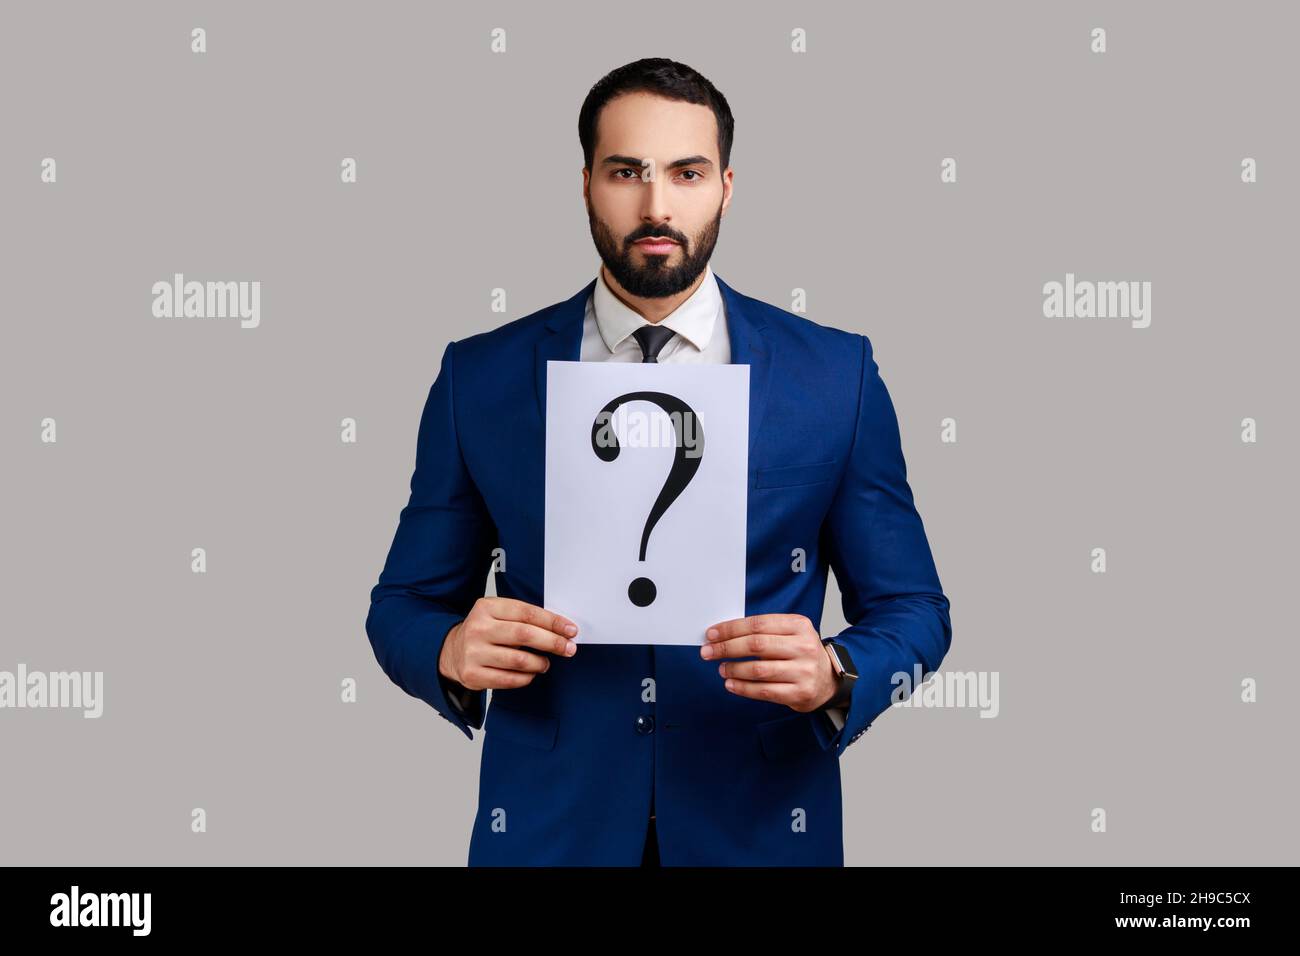 Portrait of serious bearded businessman looking at camera, holding paper with question mark, thinks about tasks, wearing official style suit. Indoor studio shot isolated on gray background. Stock Photo